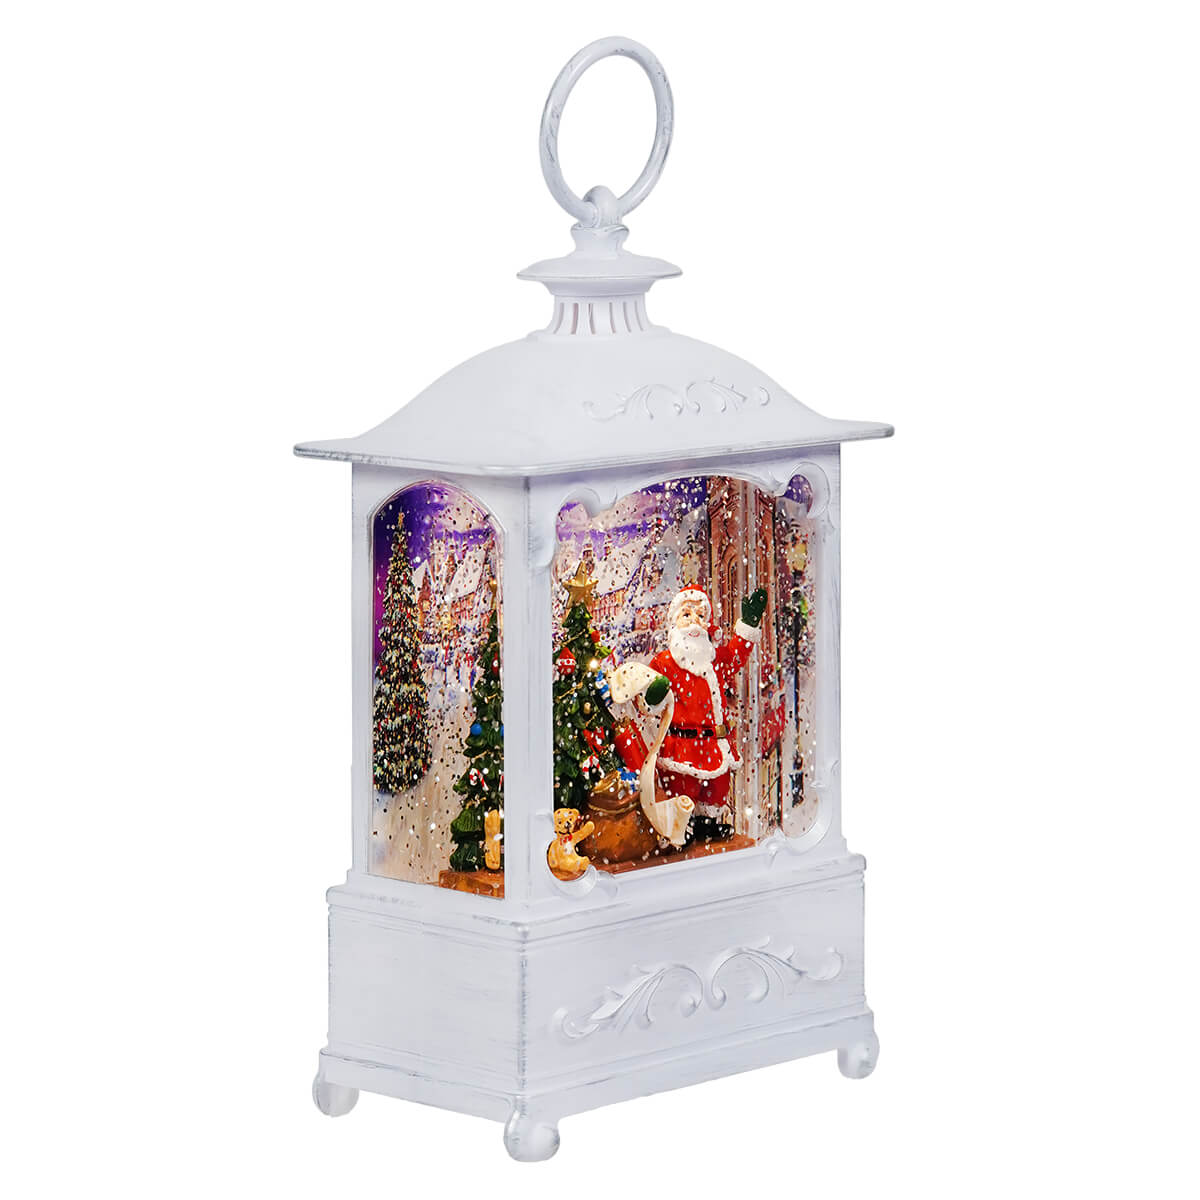 Lighted Spinning Water Globe Lantern With Santa Delivering Presents